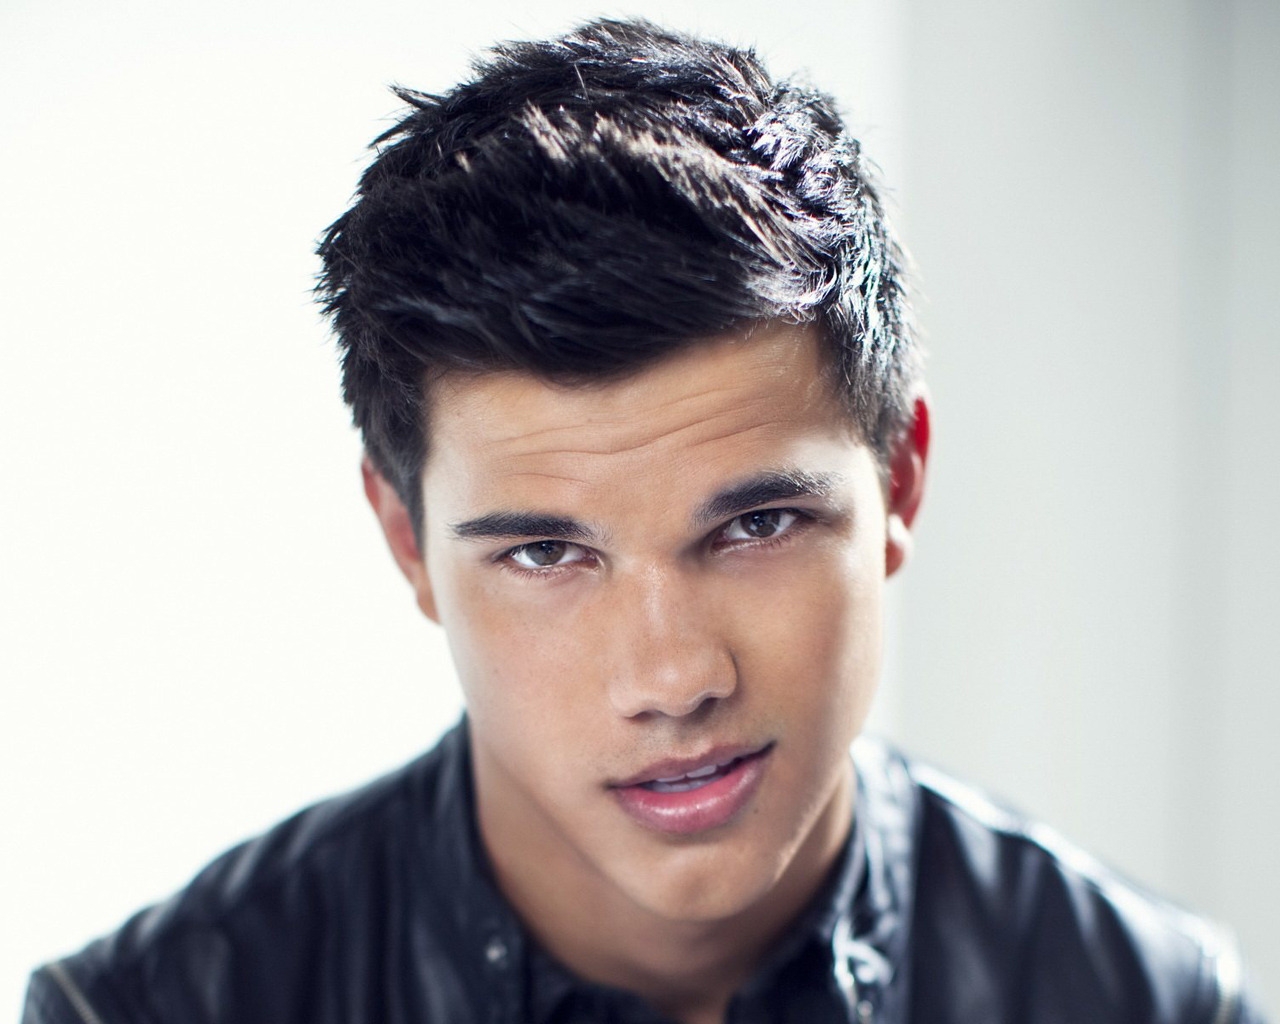 Taylor Lautner Look for 1280 x 1024 resolution